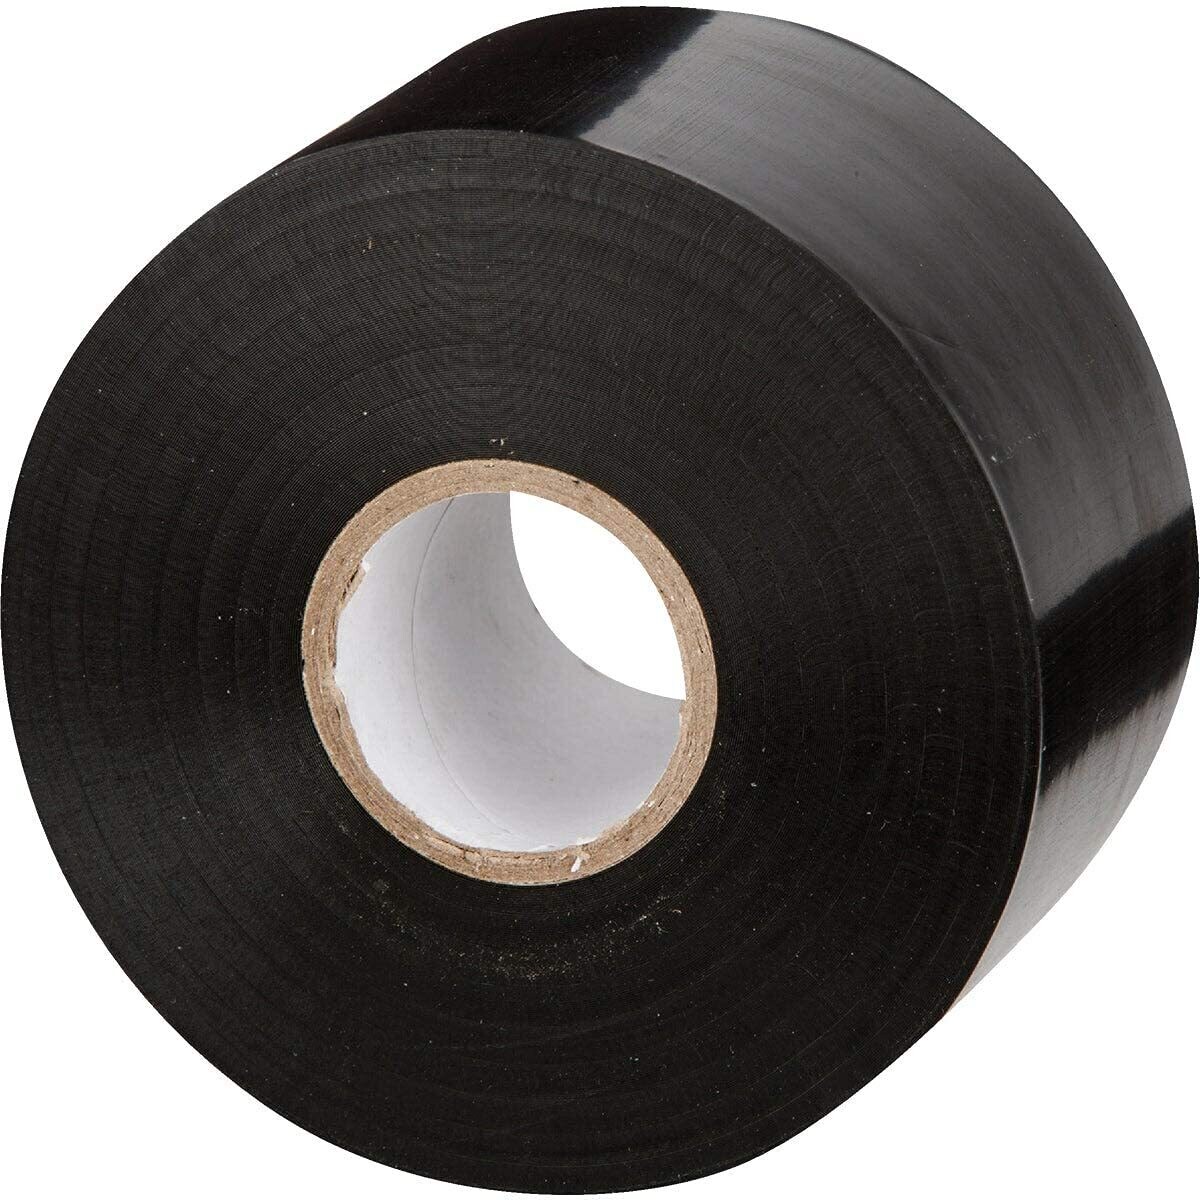 WEEPING TILE TAPE - 2" X 100' ROLL